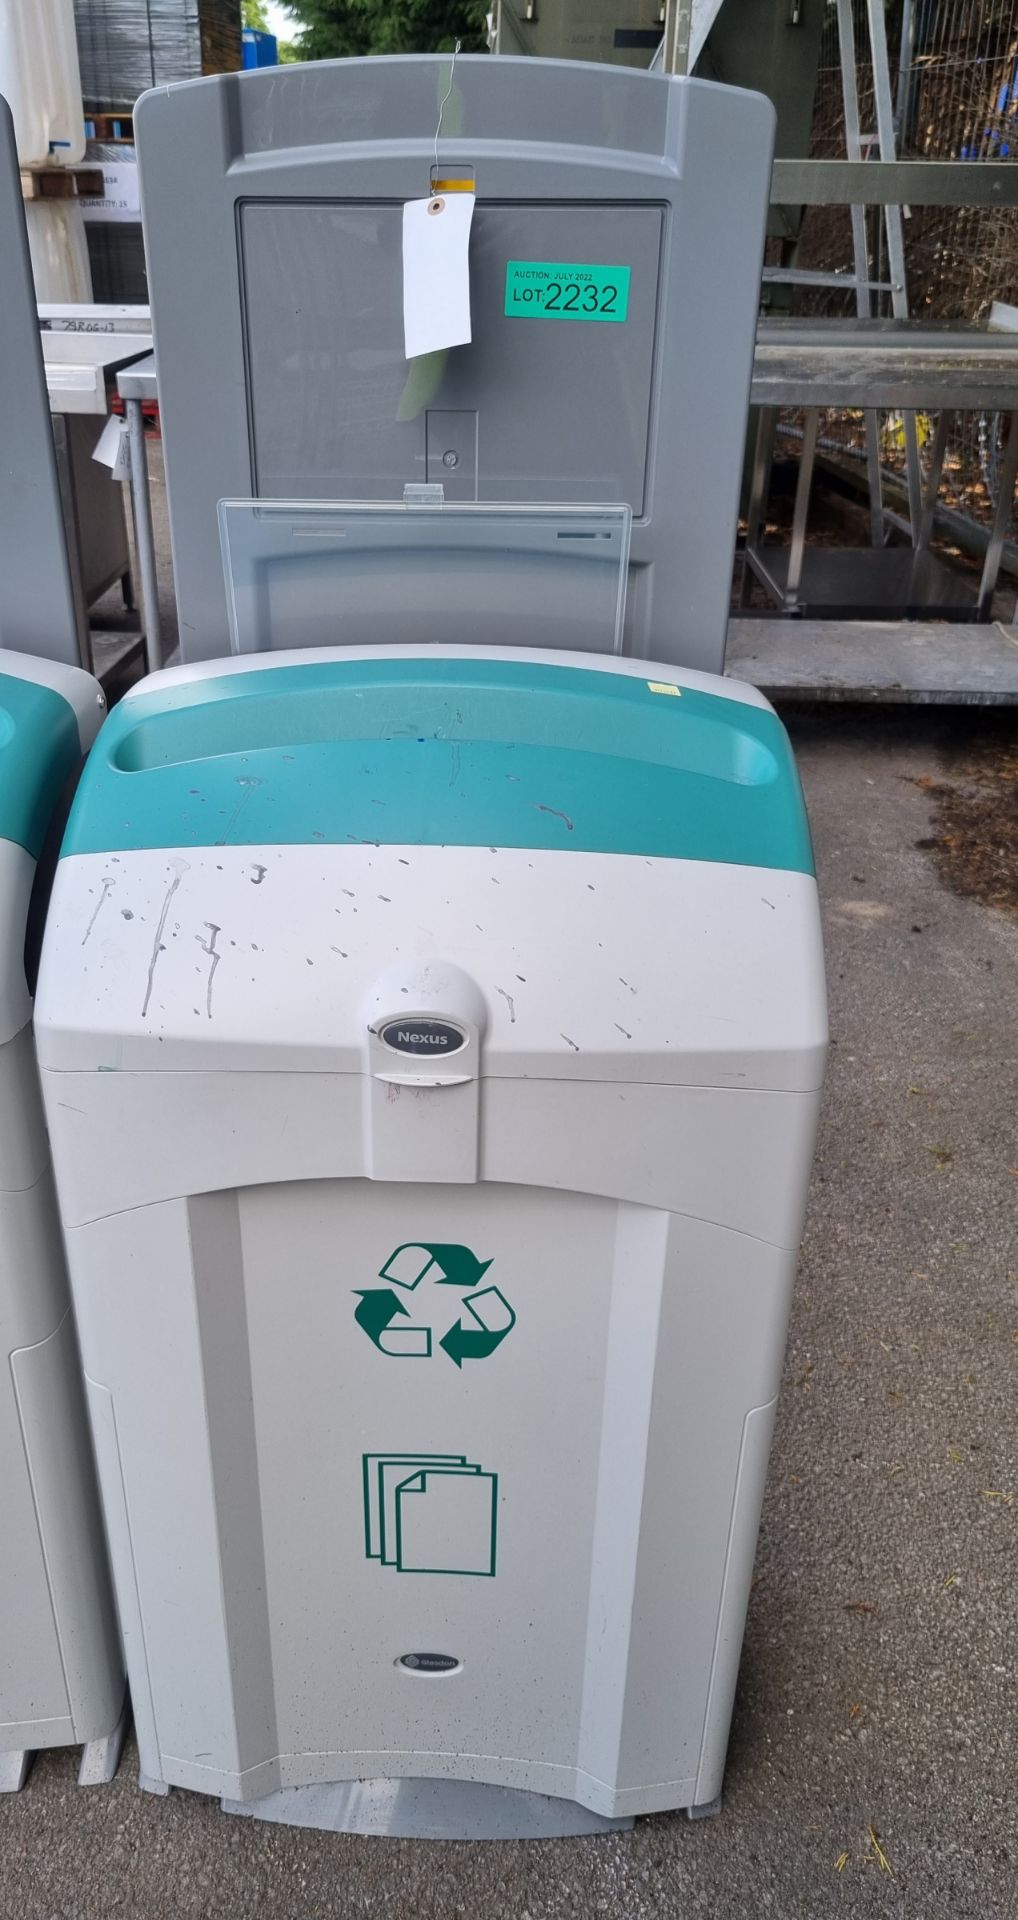 Plastic recycle bin (paper only) - aqua green and grey - Image 2 of 2